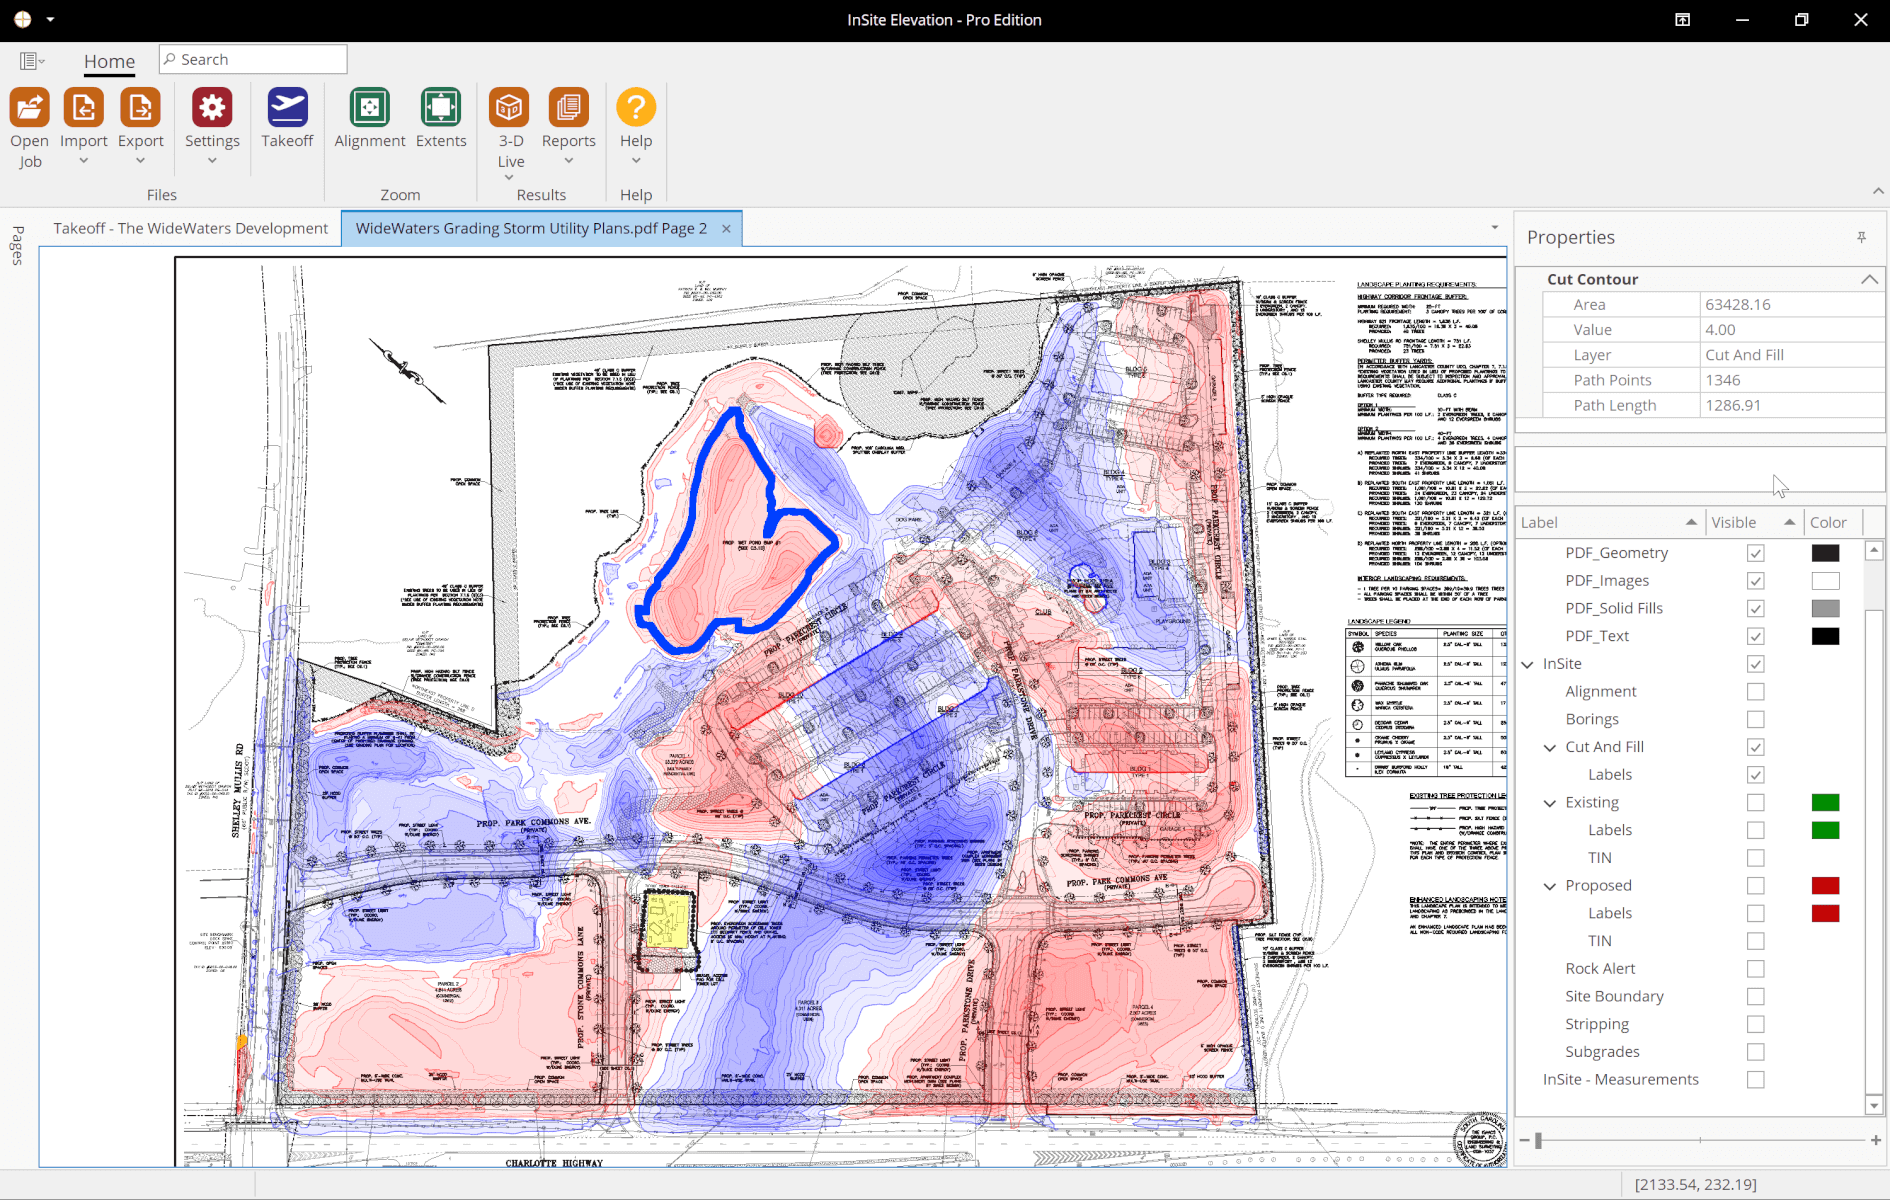 Example of InSite Elevation Pro's Contour Cut and Fill Map